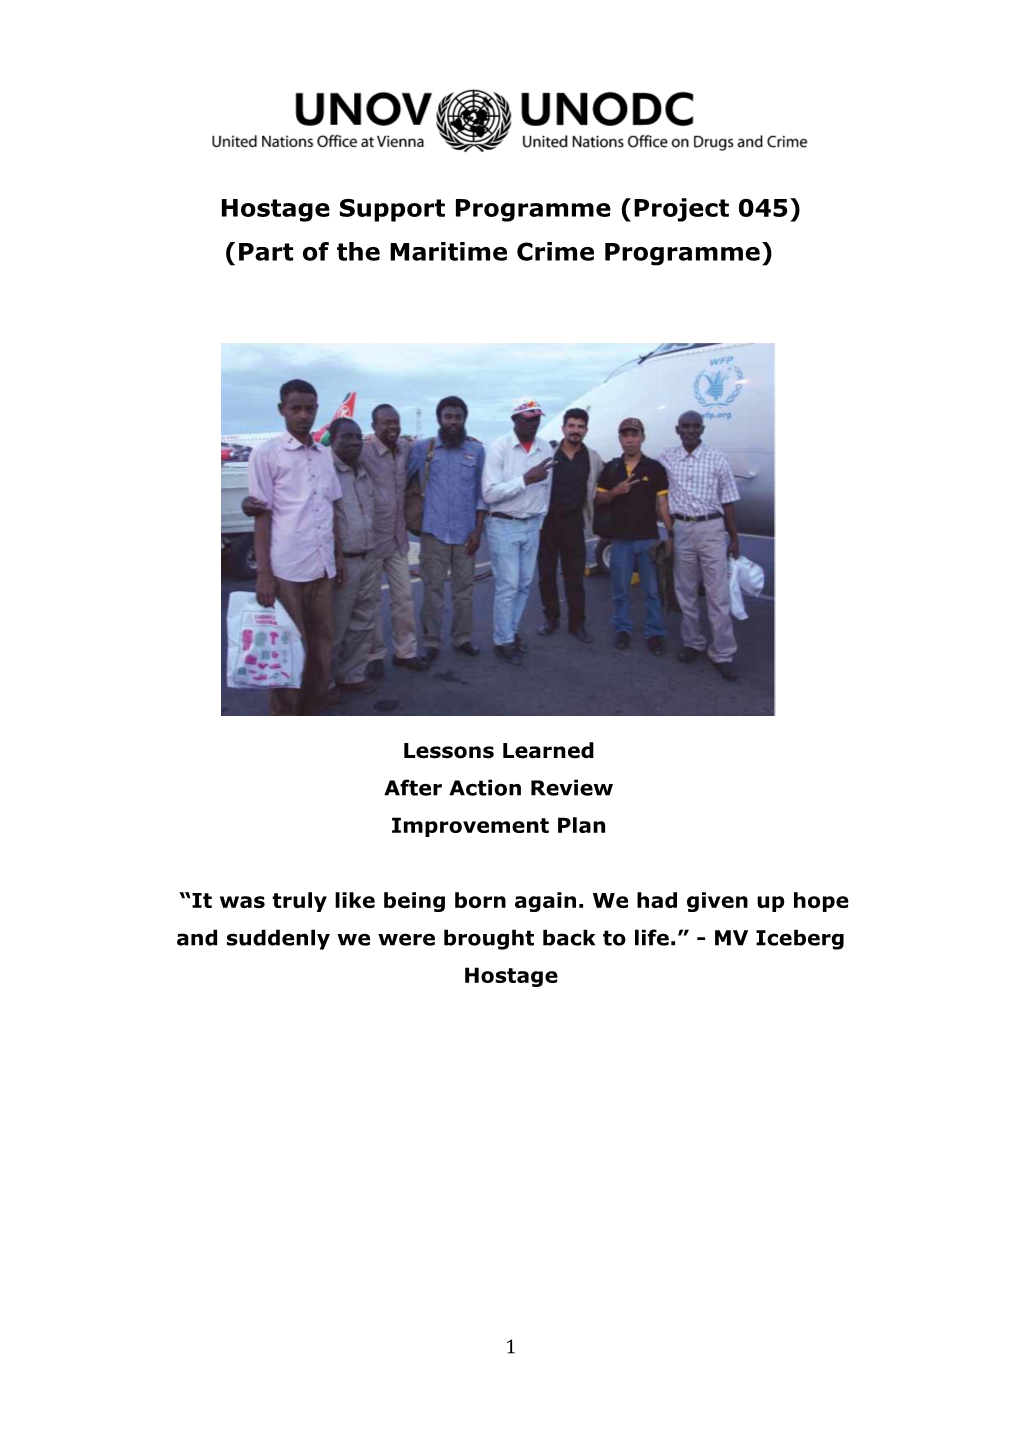 Hostage Support Programme (Project 045) (Part of the Maritime Crime Programme)